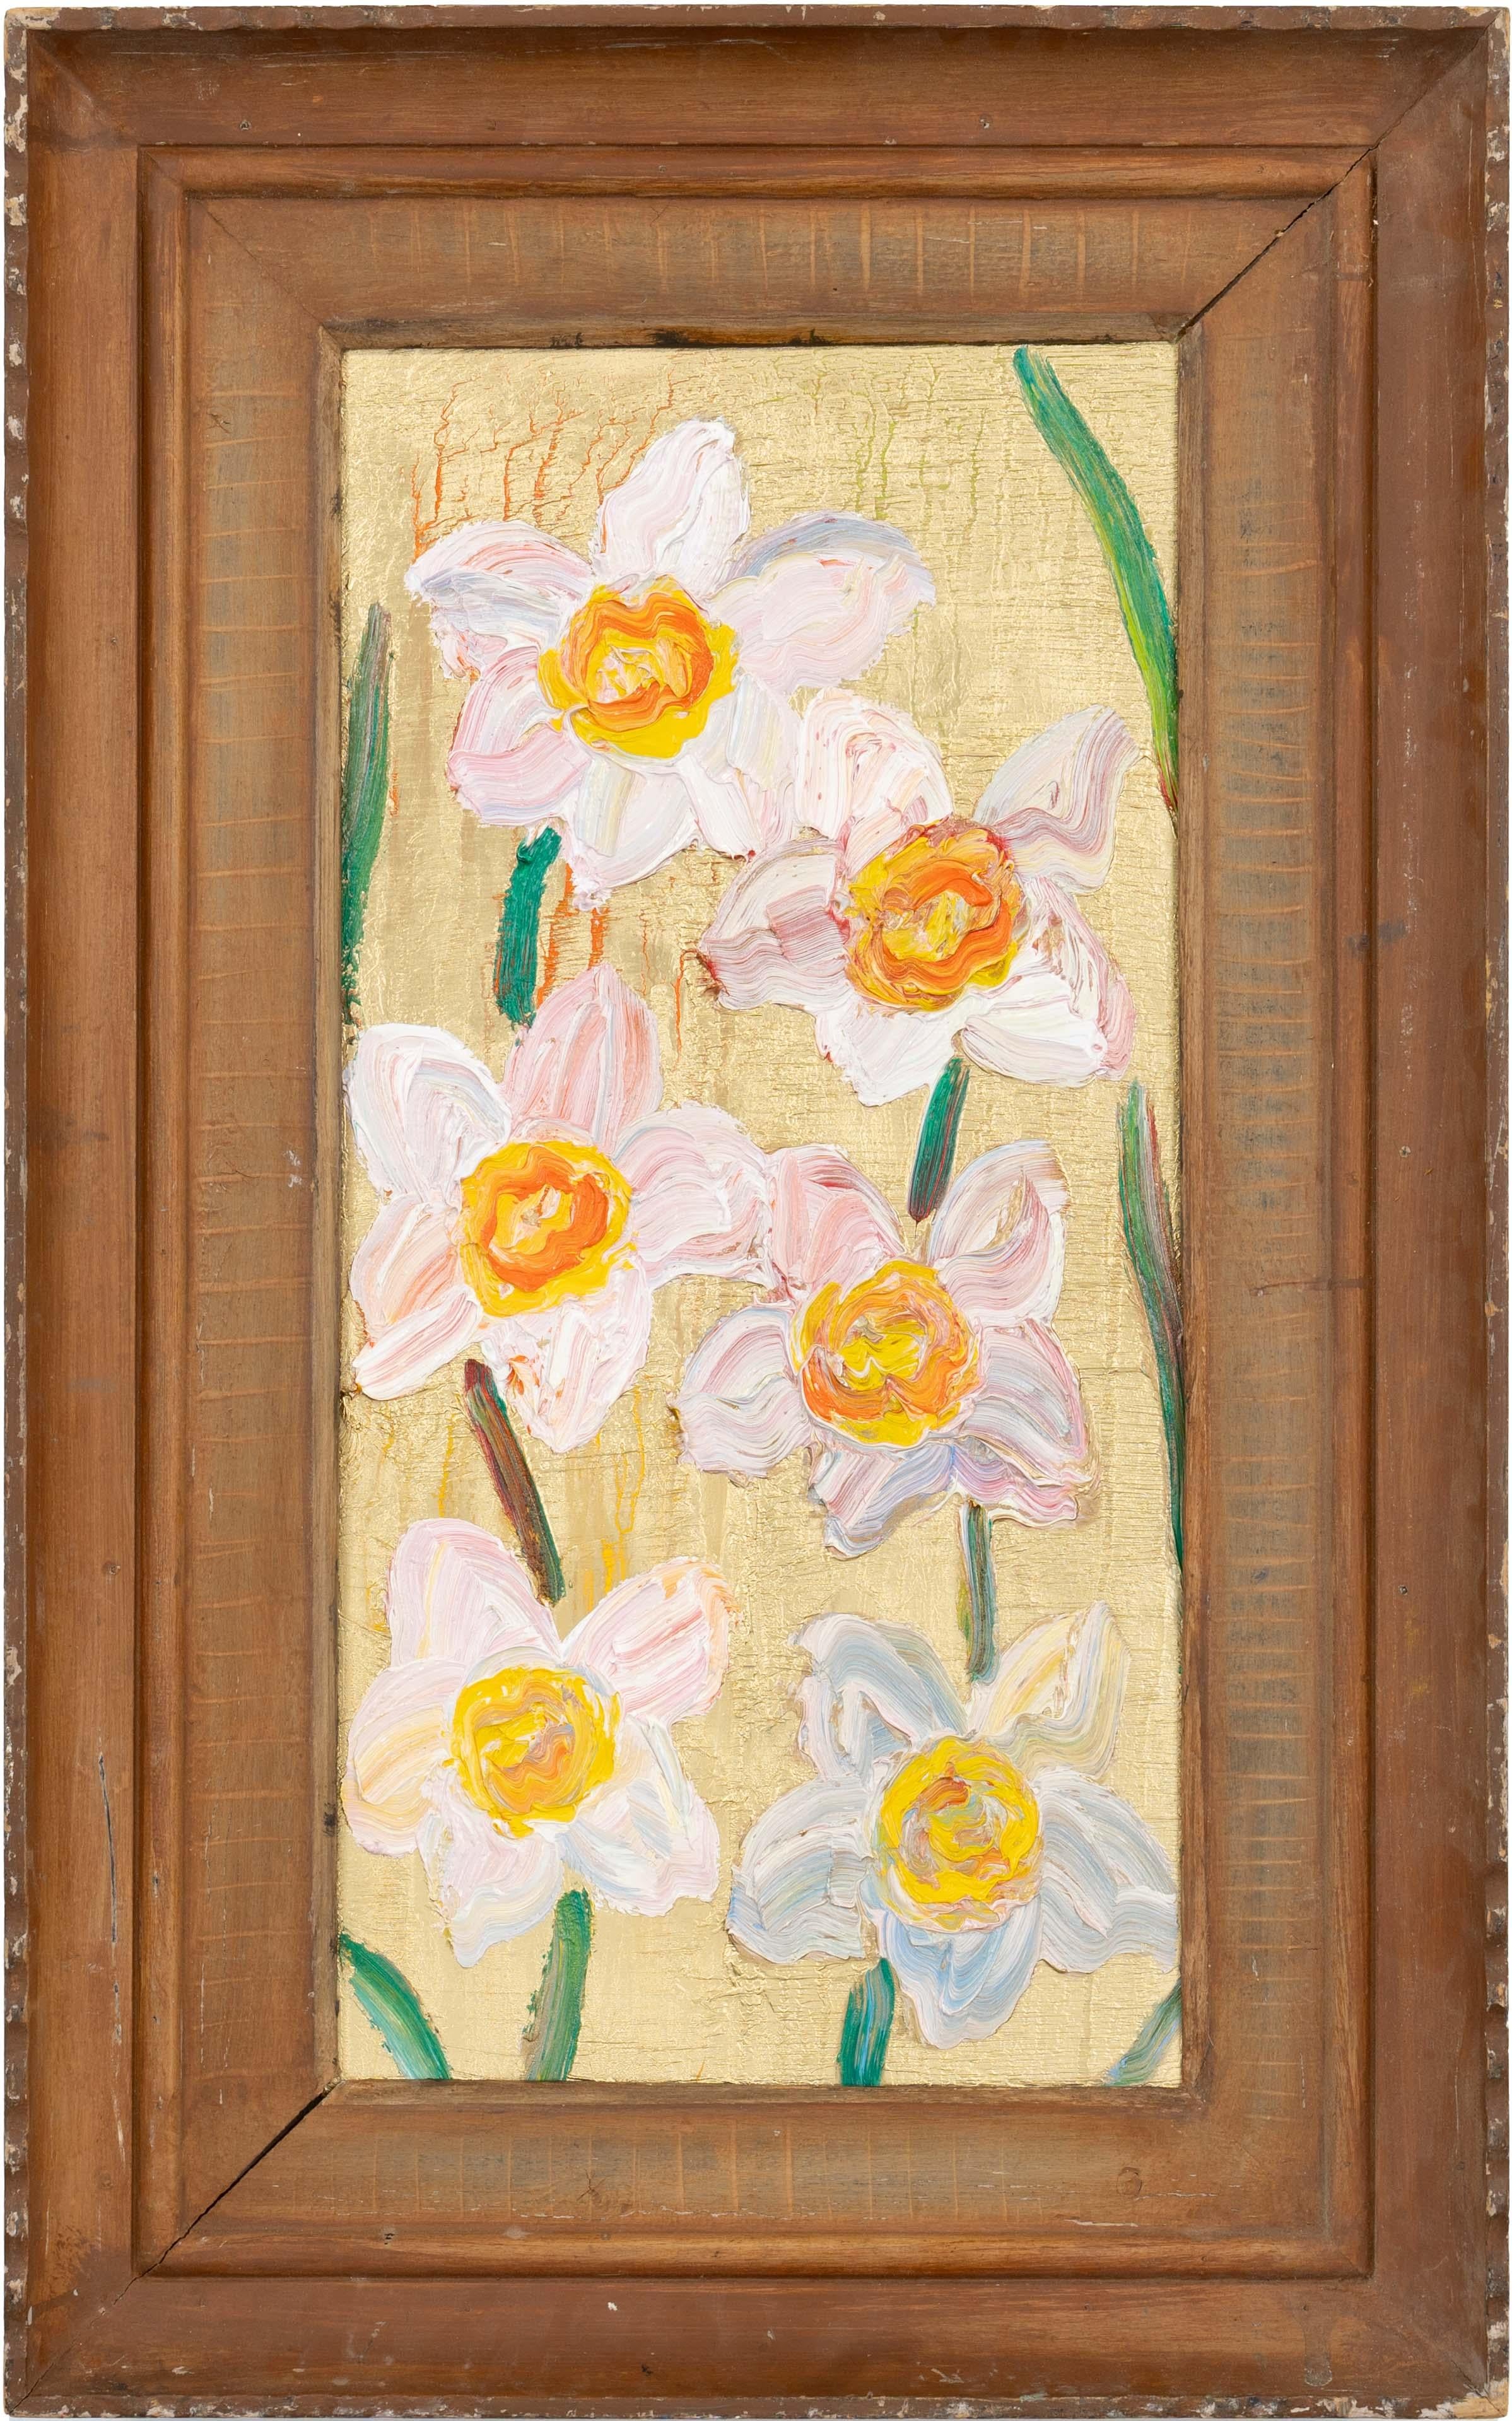 Hunt Slonem "Spring Jonquils" Flowers on Gold
Light flowers with colored accents on a gold metallic background in an antique wooden frame.

Unframed: 27 x 13 inches
Framed: 36 x 22.5 inches
*Painting is framed - Please note Hunt Slonem paintings